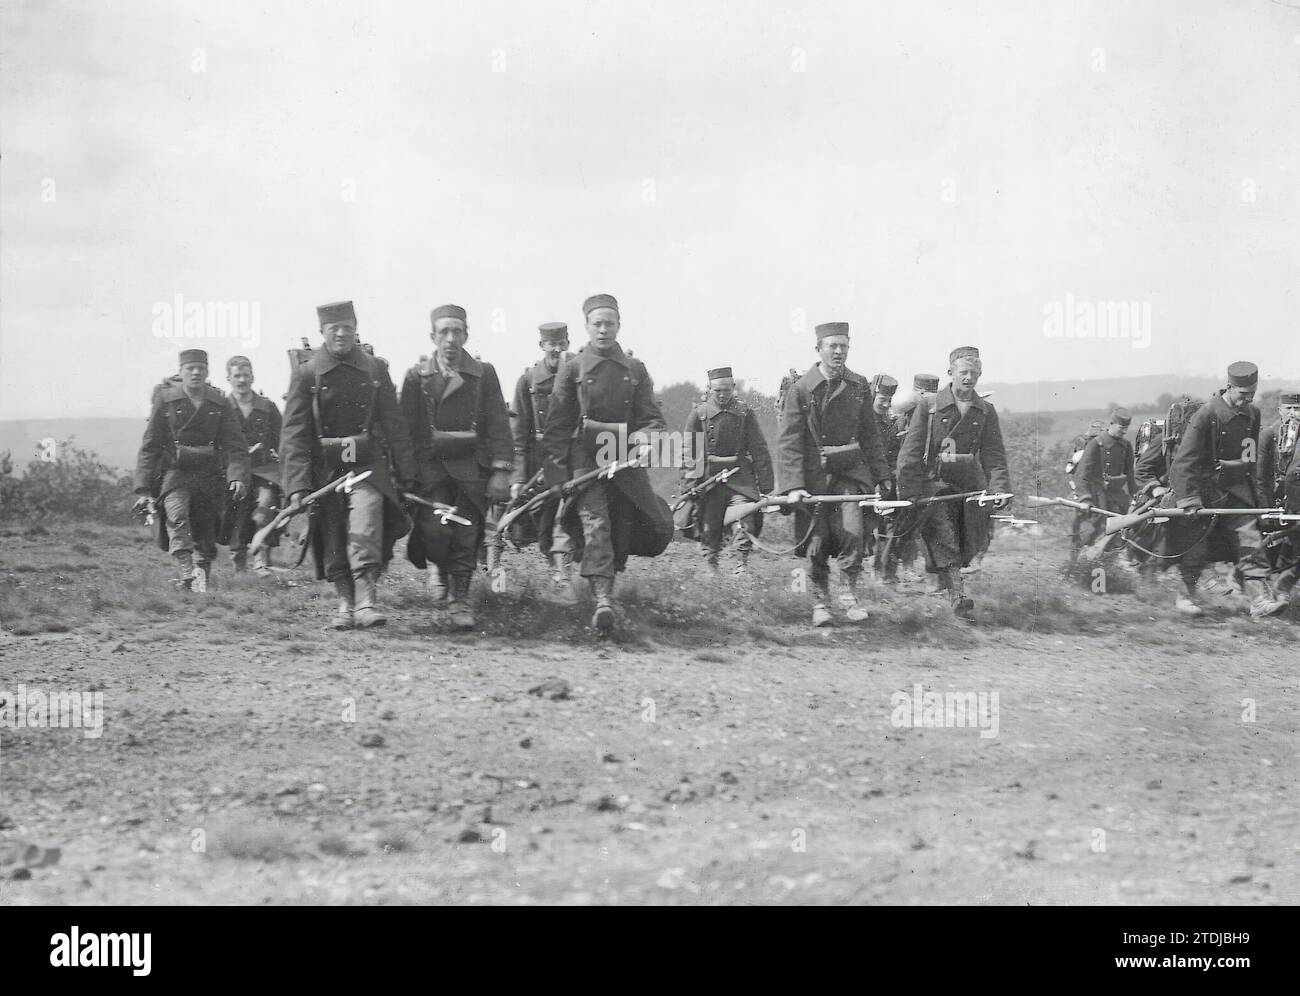 07/31/1914. The Belgian army in the War. Belgian infantry soldiers who so heroically defend Liège from the attack of the Germans. Credit: Album / Archivo ABC / Charles Chusseau Flaviens Stock Photo